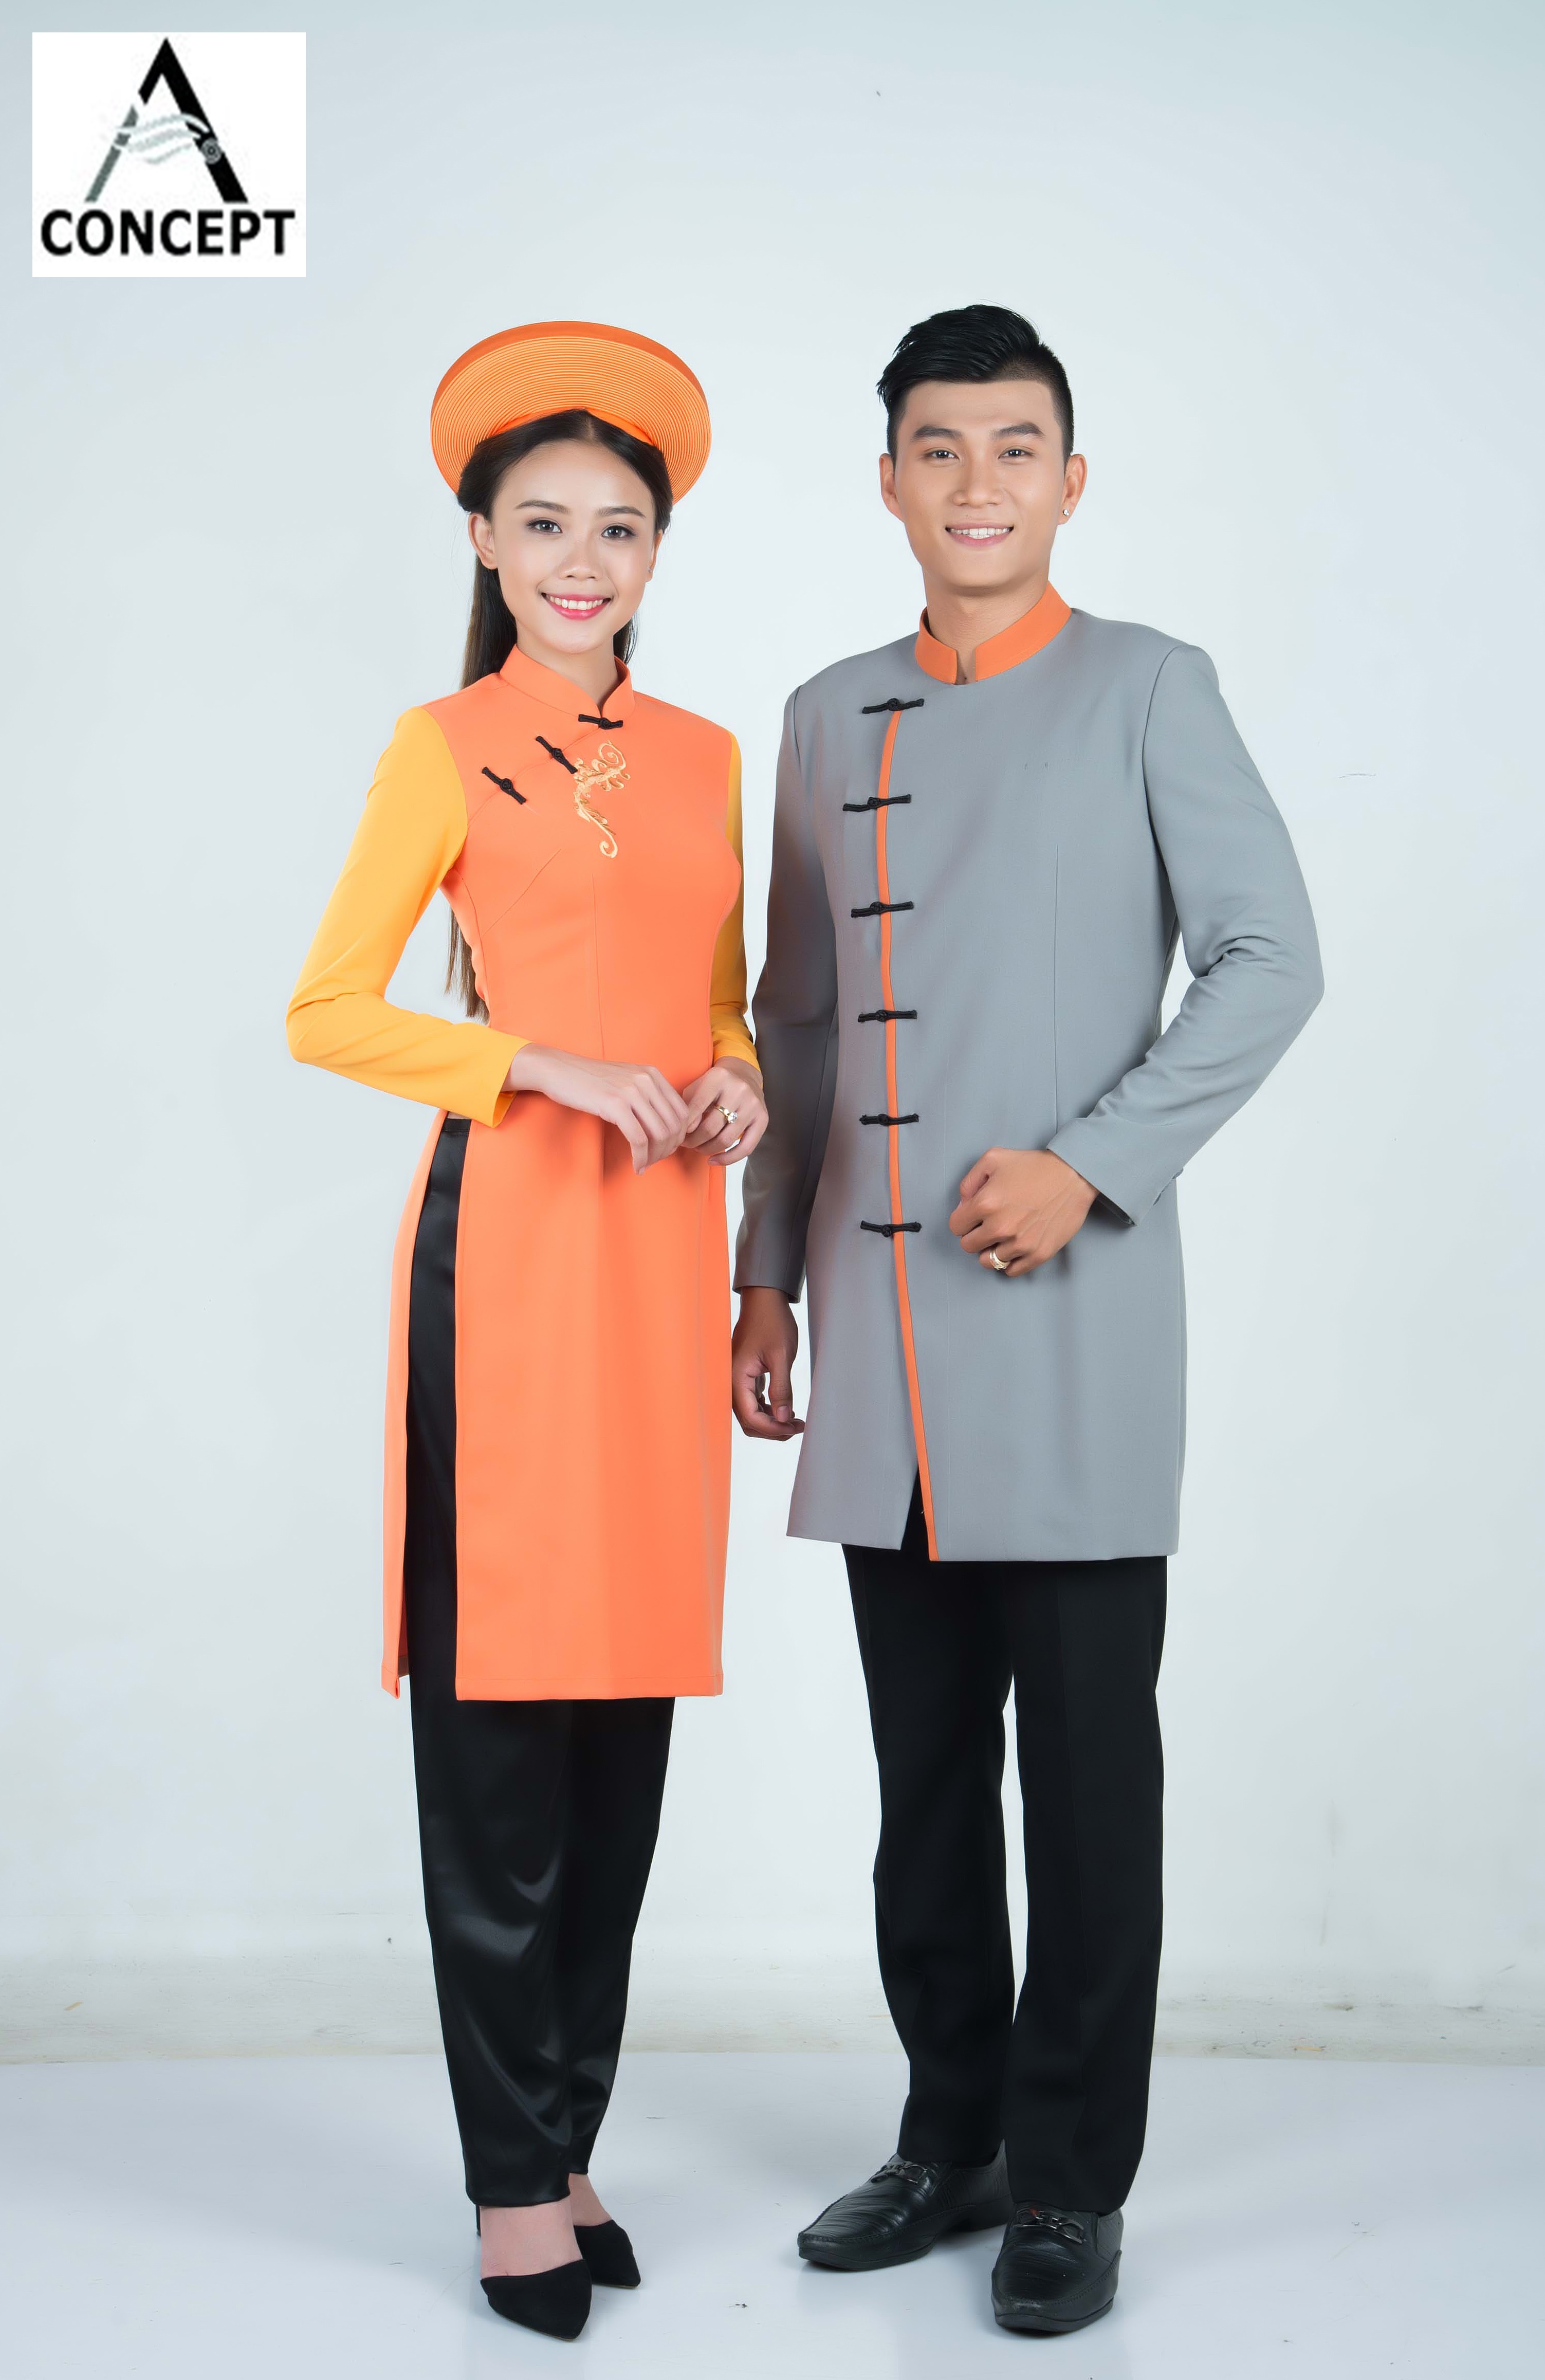 BEAUTIFUL AO DAI FOR RECEPTIONIST - CÔNG TY TNHH A CONCEPT